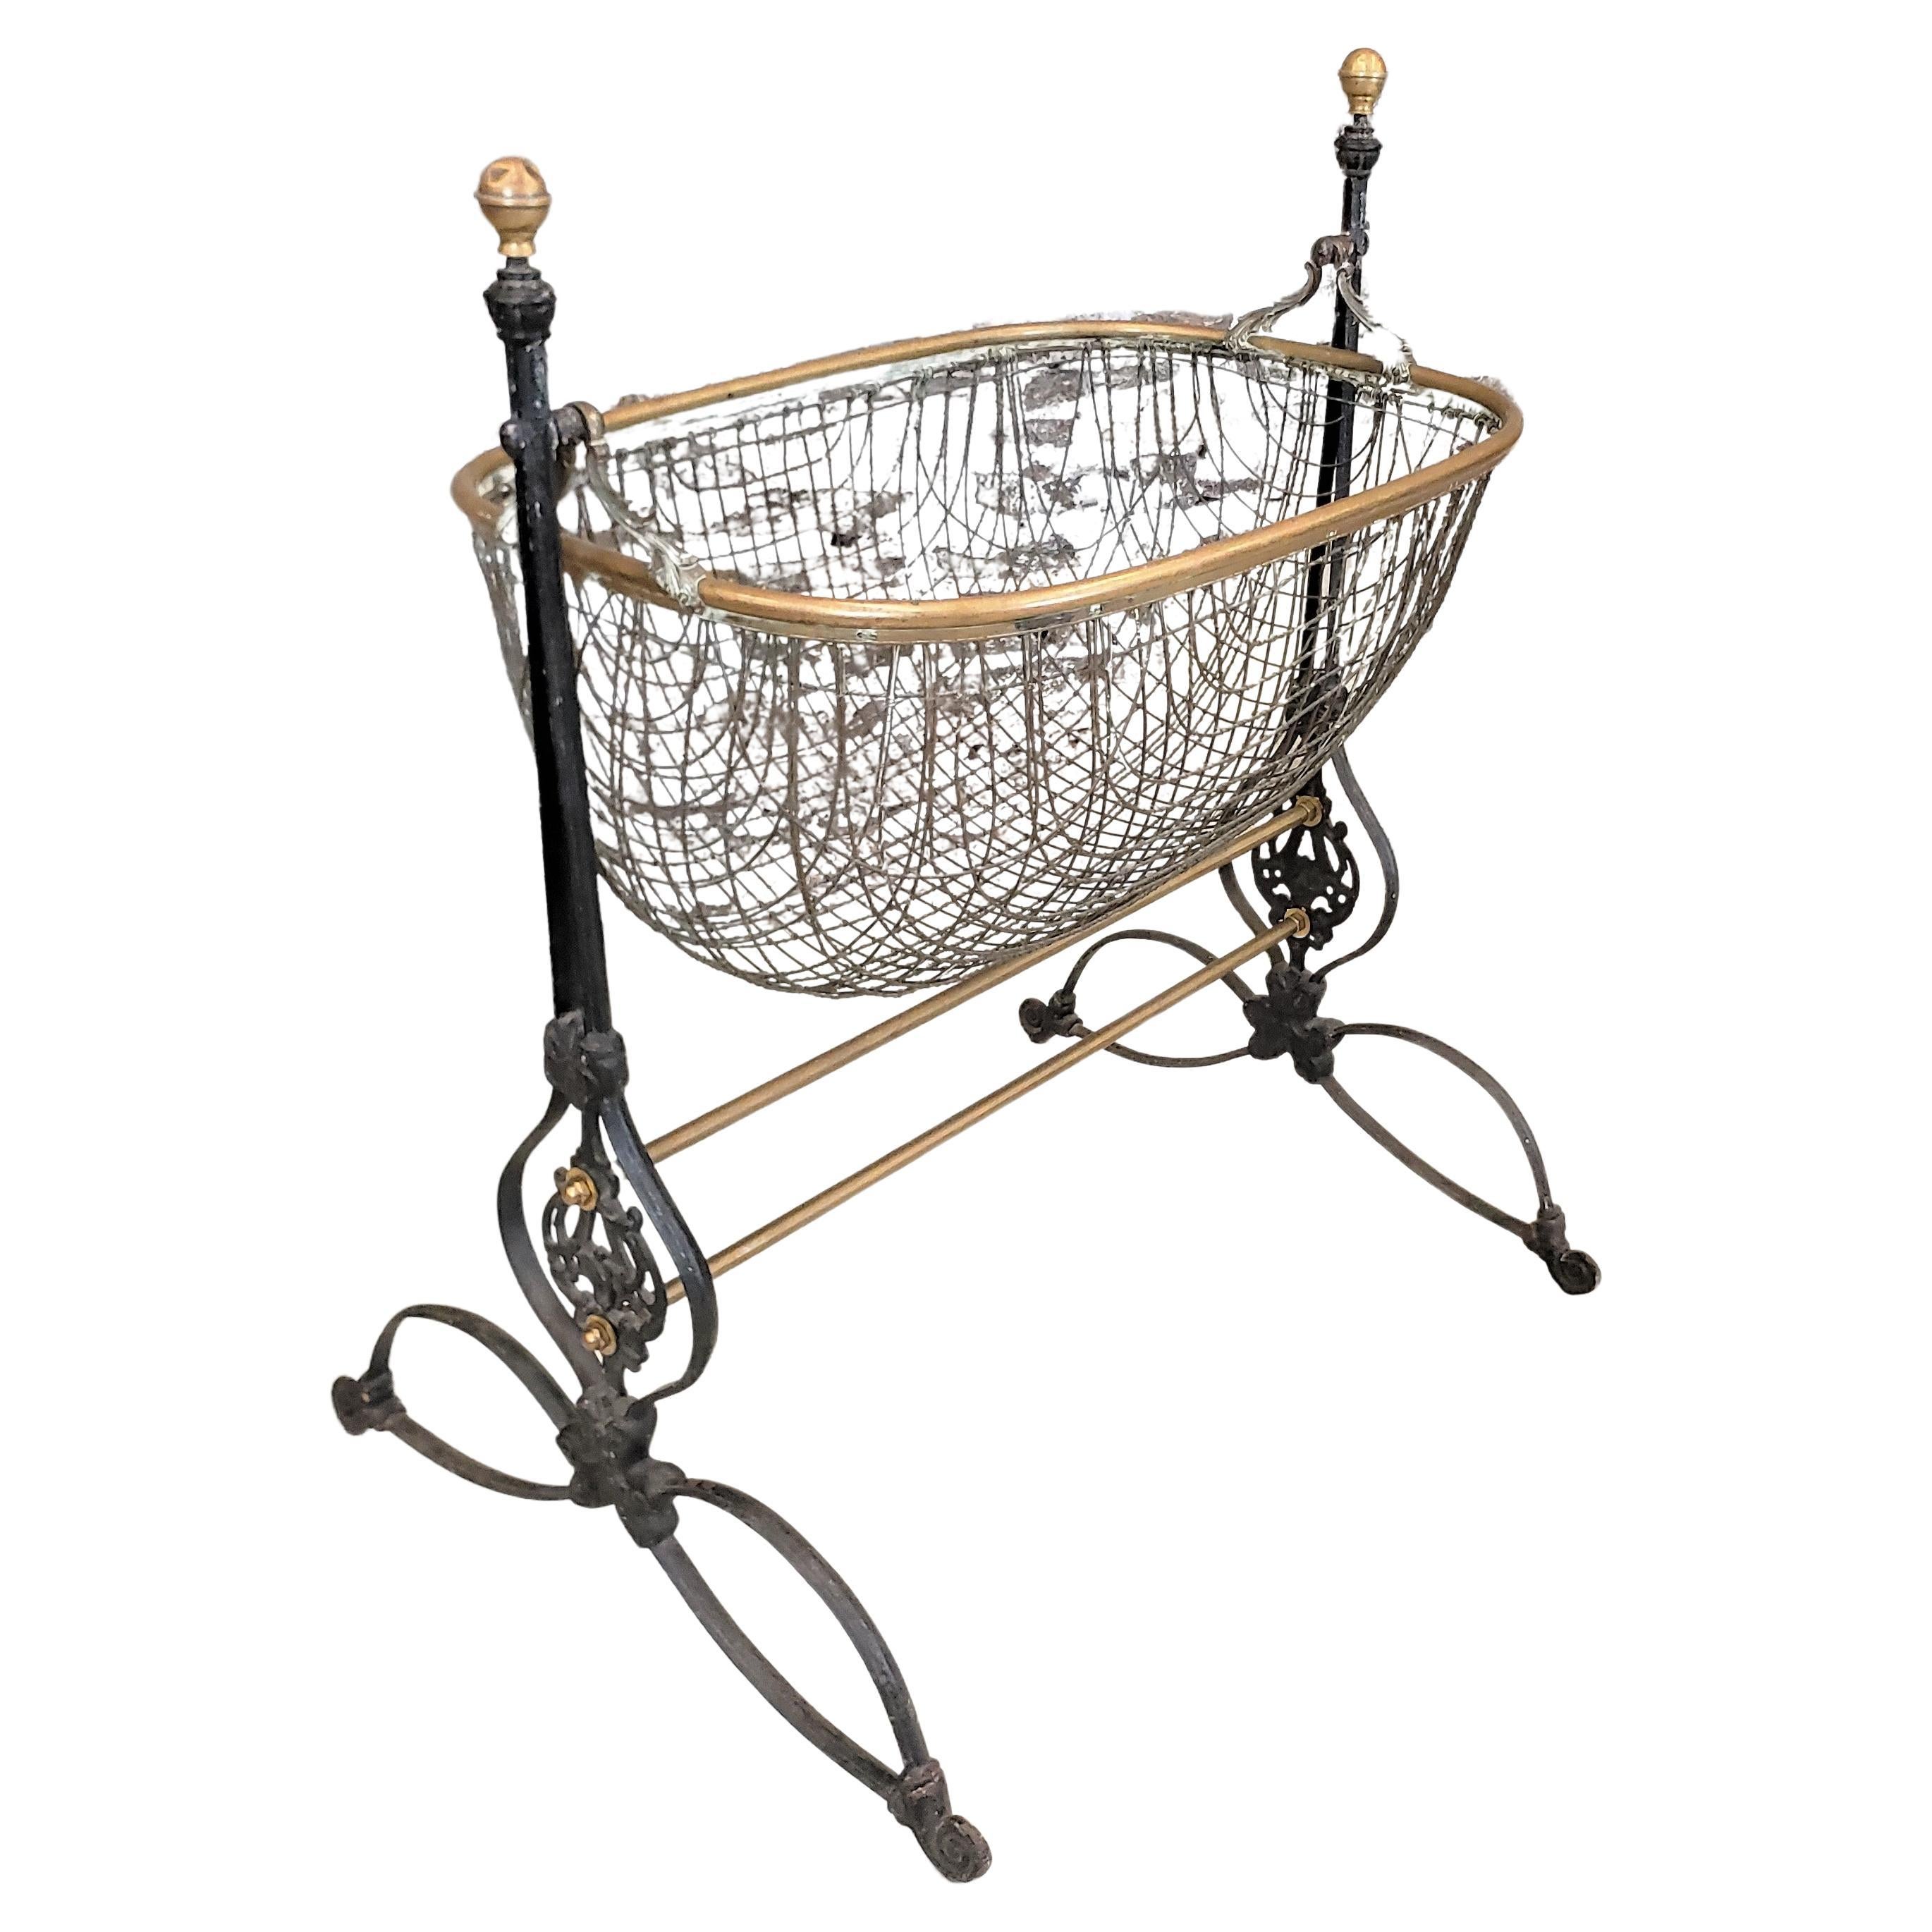 Antique Victorian Ornate Cast Iron & Brass Swinging Baby Cradle or Plant Stand For Sale